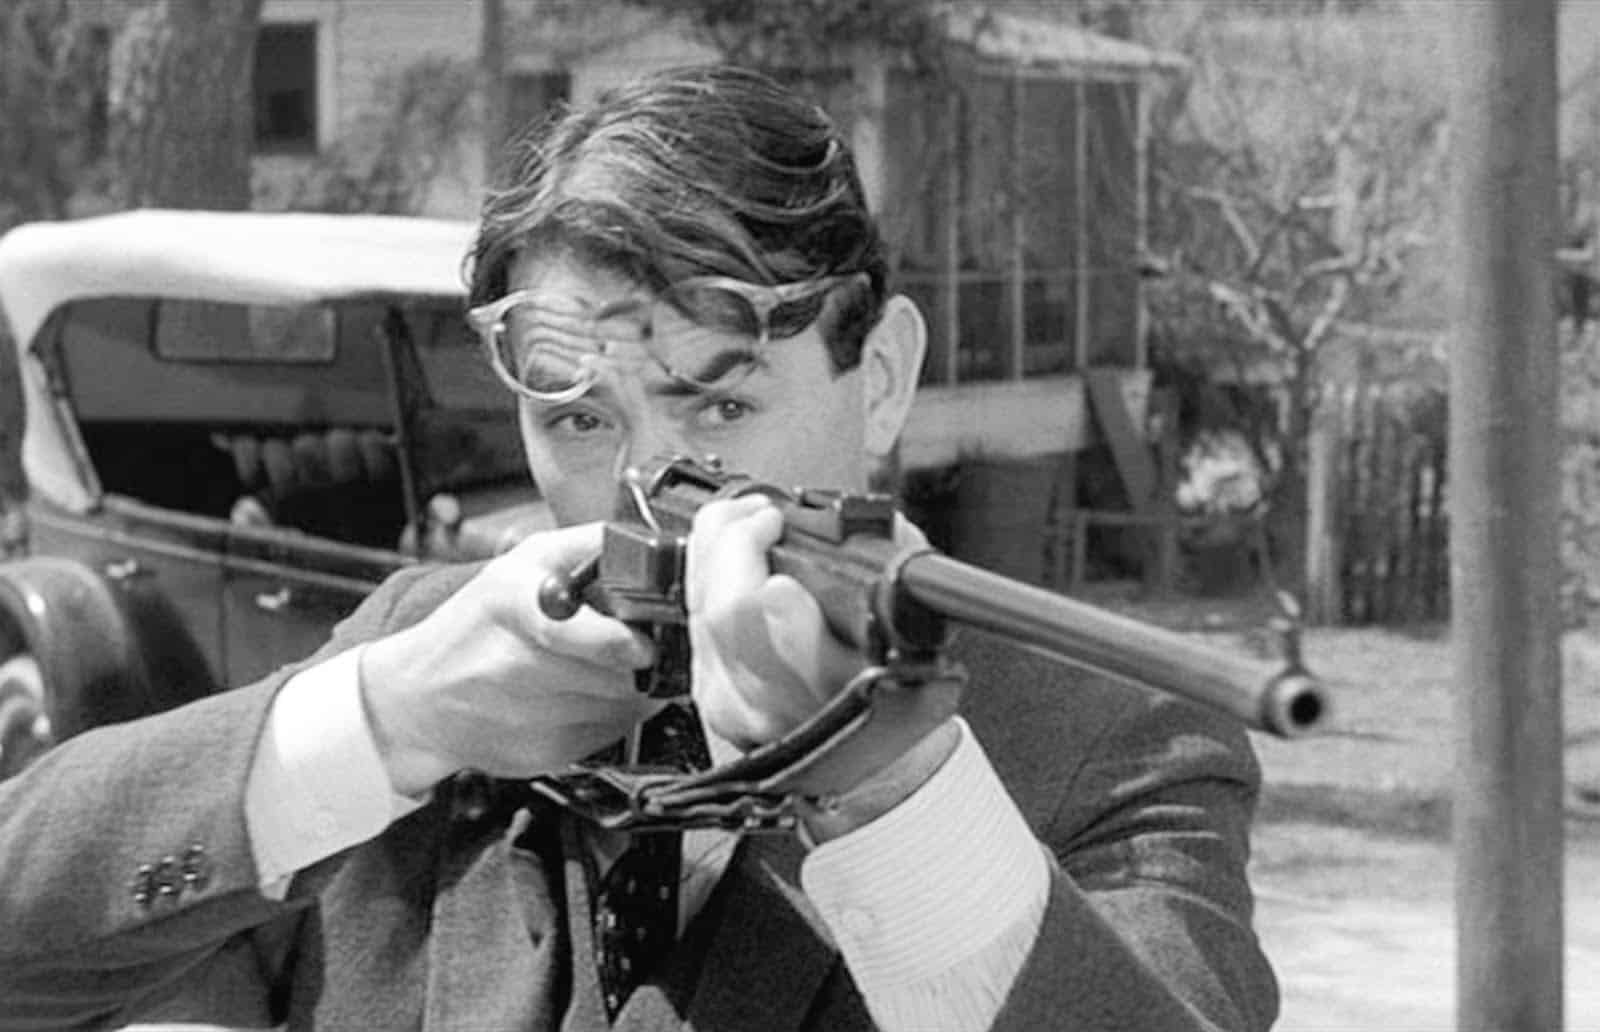 Atticus Finch from To Kill a Mockingbird holding a rifle. Photo: Scott Ritter Extra. 